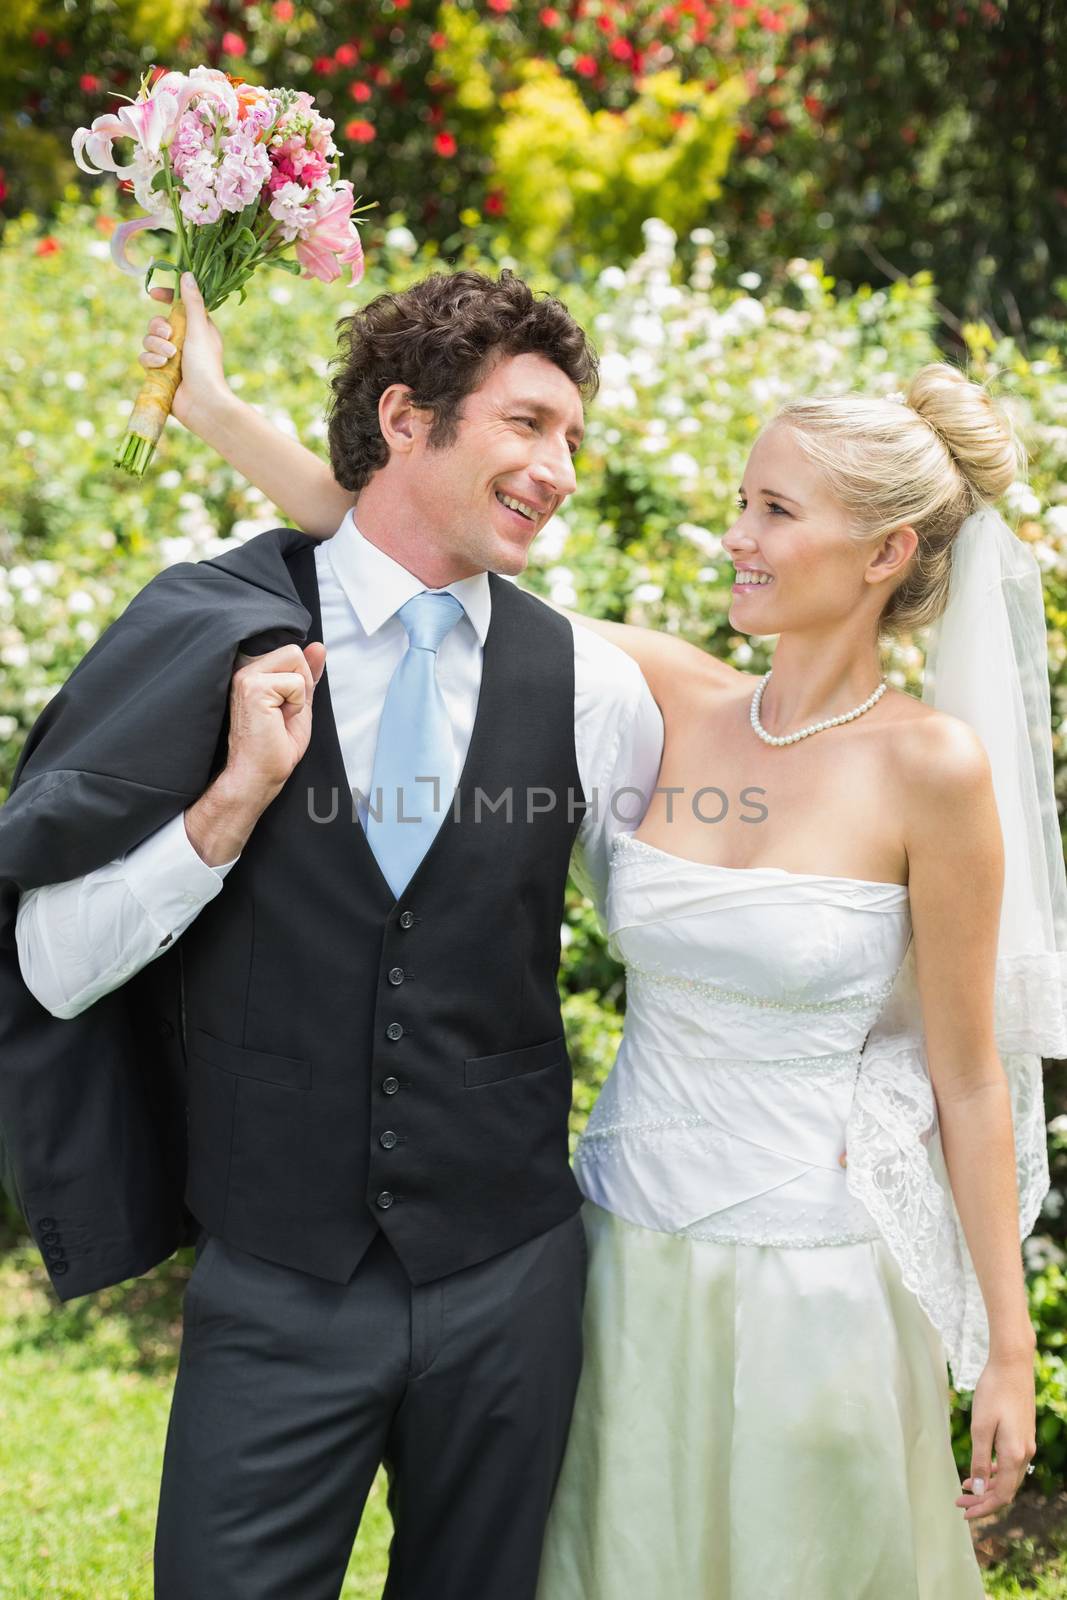 Romantic newlywed couple smiling at each other in the countryside